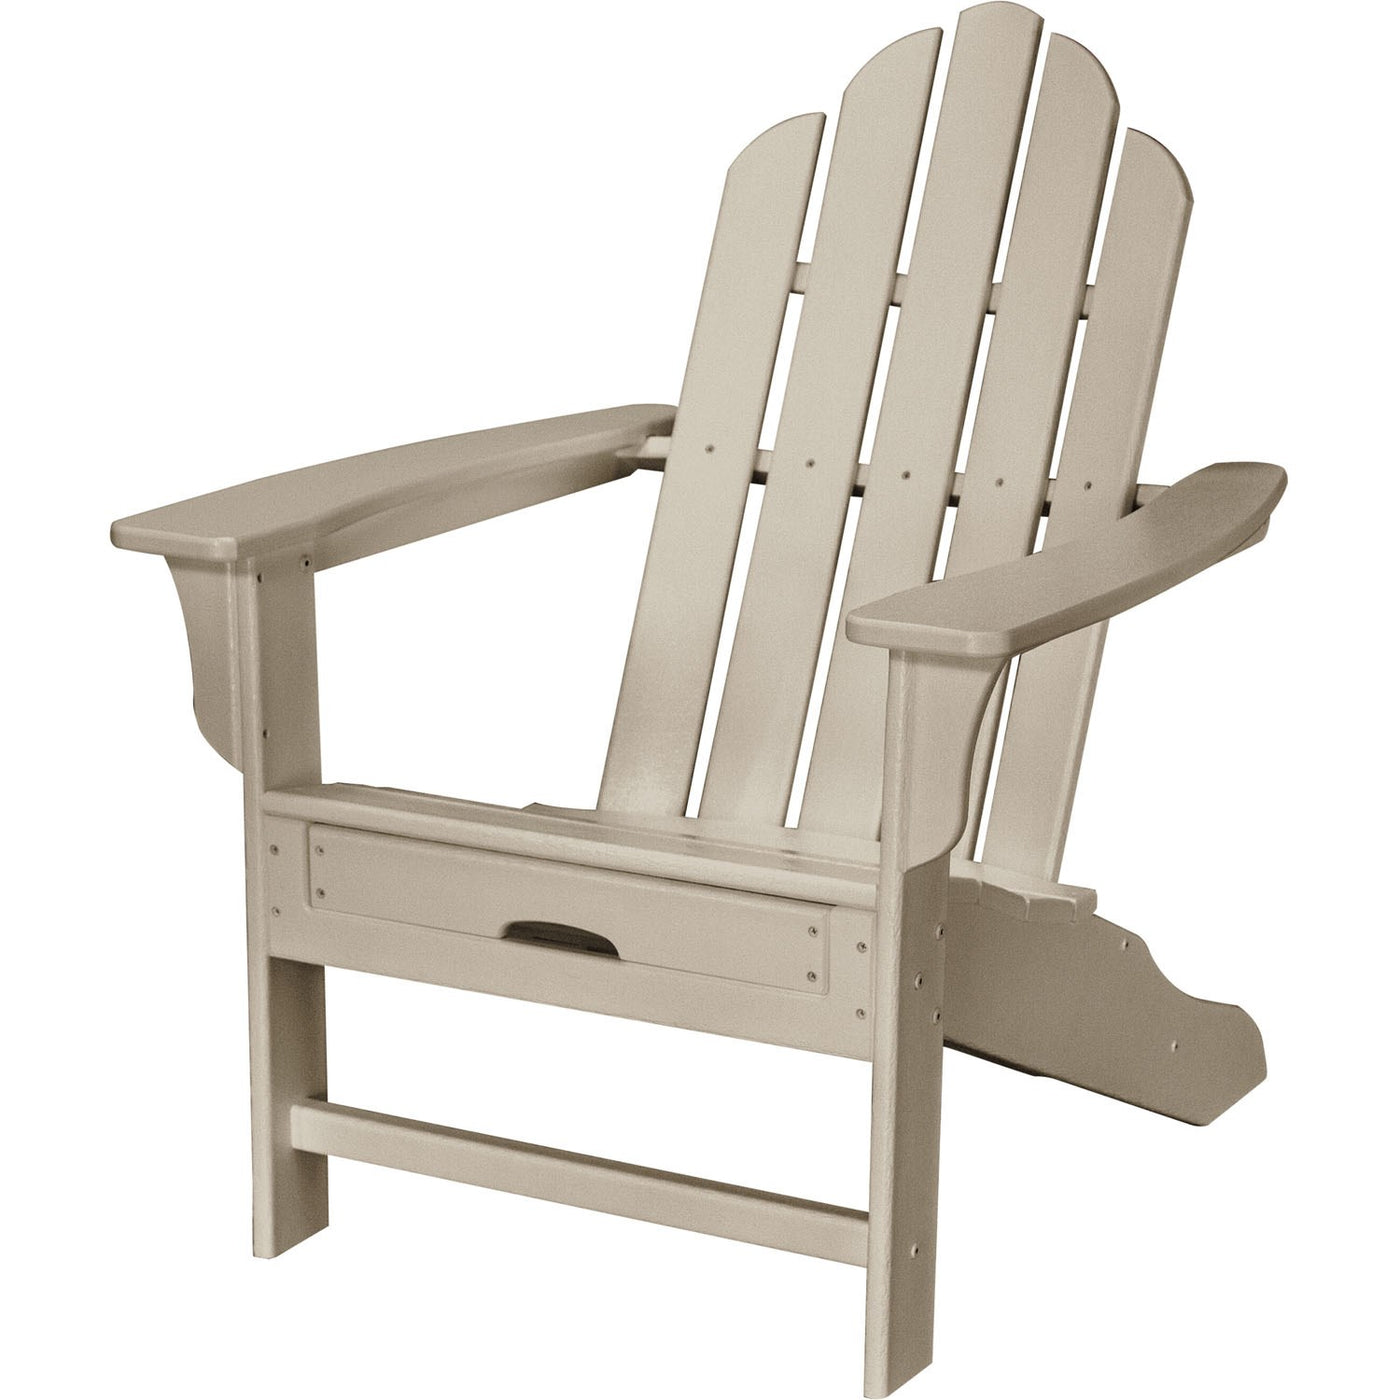 Hanover All-Weather Adirondack Chair w/ Attached Ottoman - Sand - GreenLivingSupply-Store